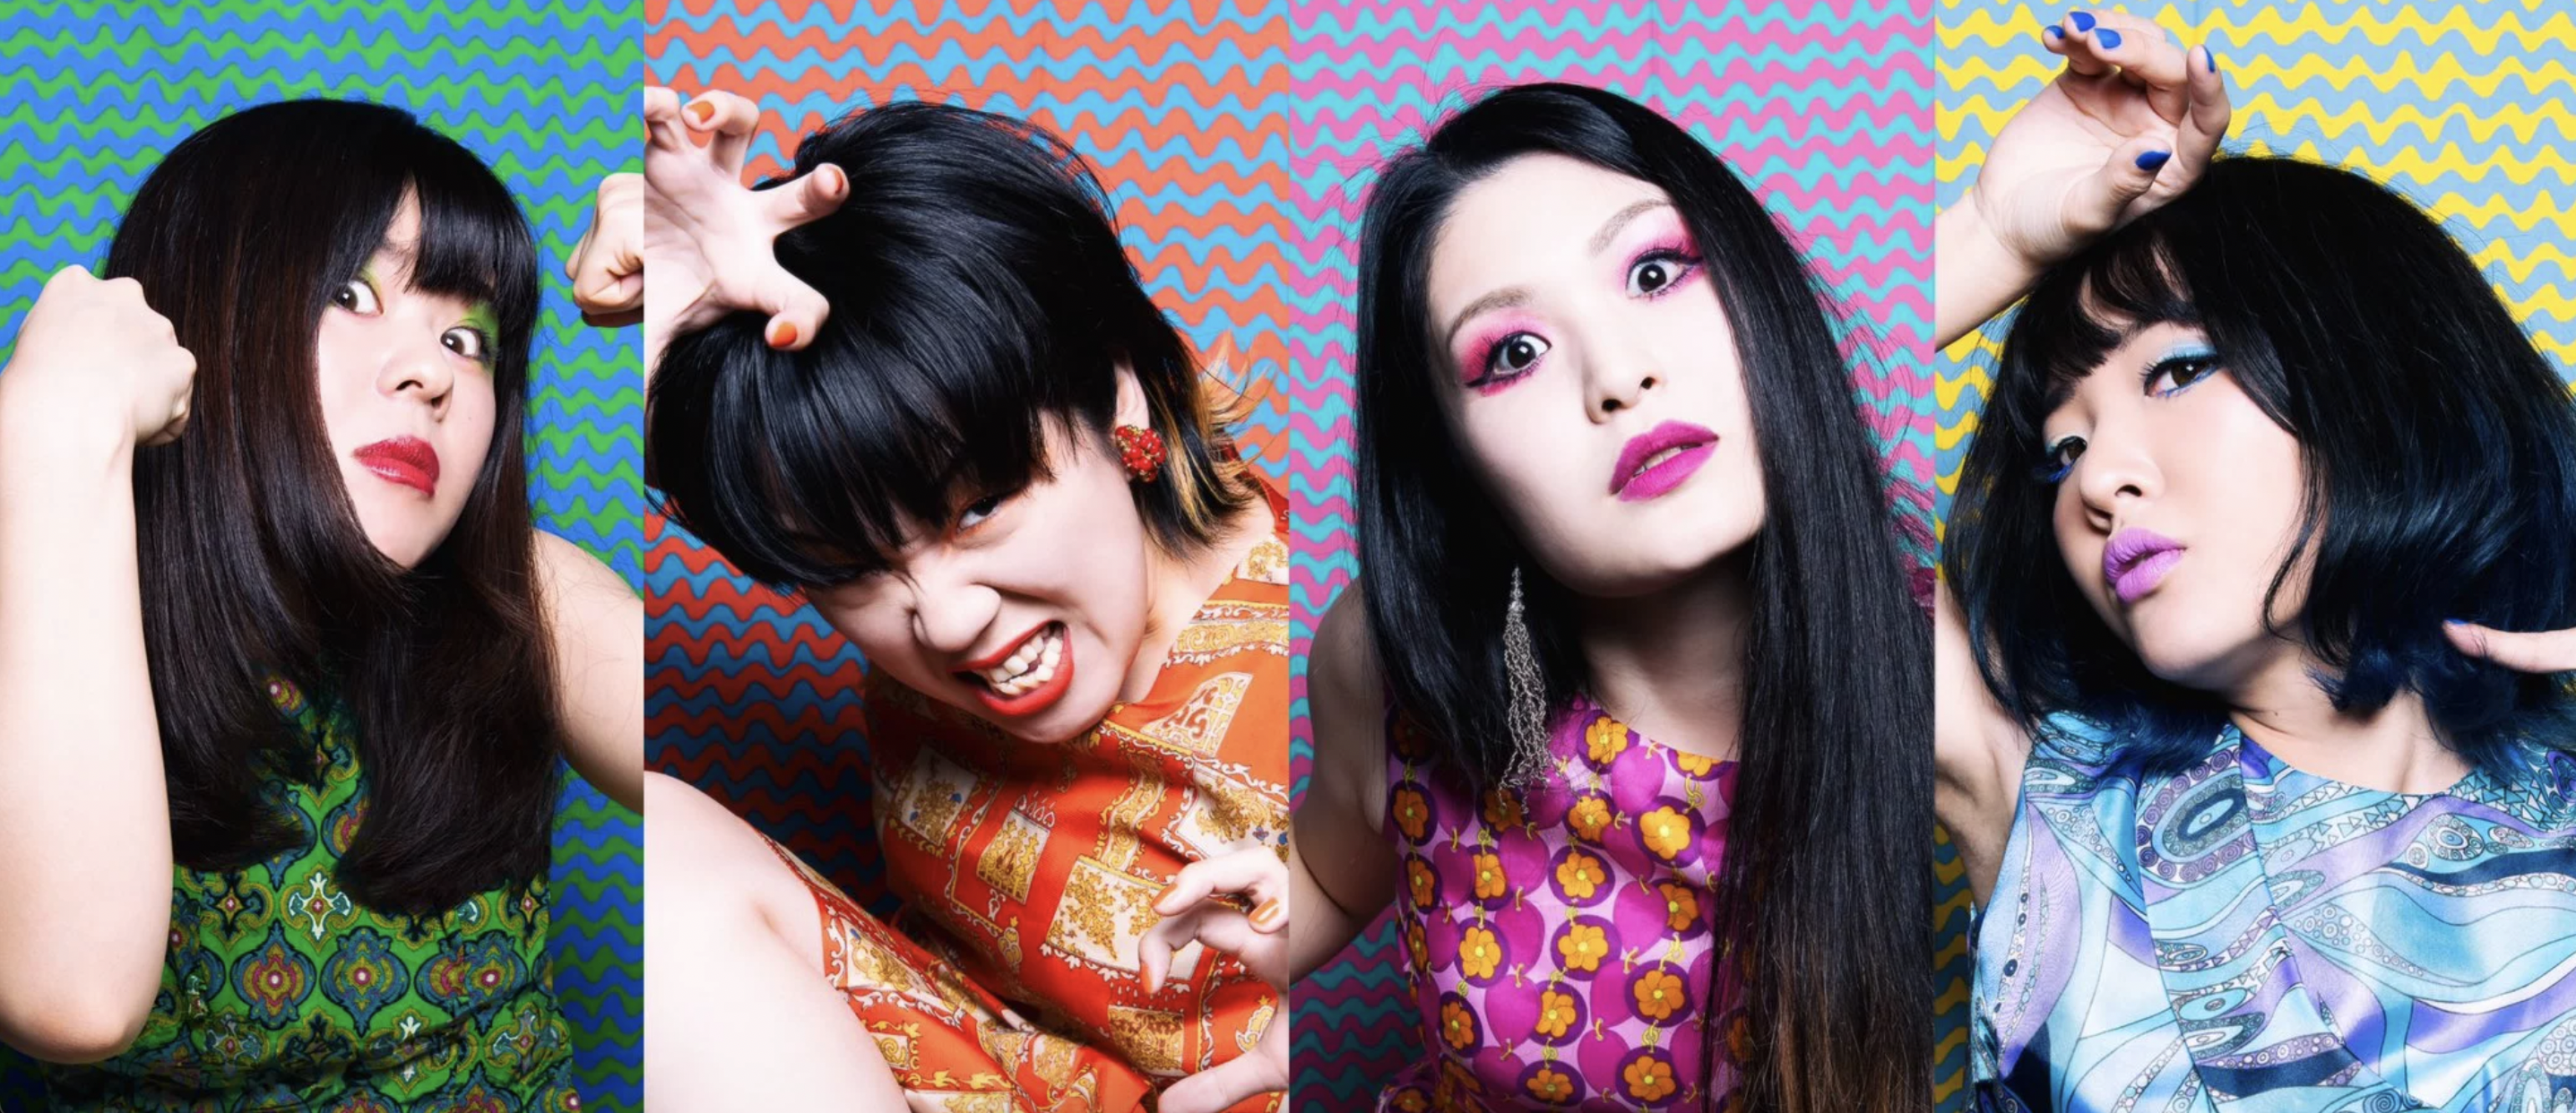 The four leading members of Otoboke Beaver in a colorful promotional shot